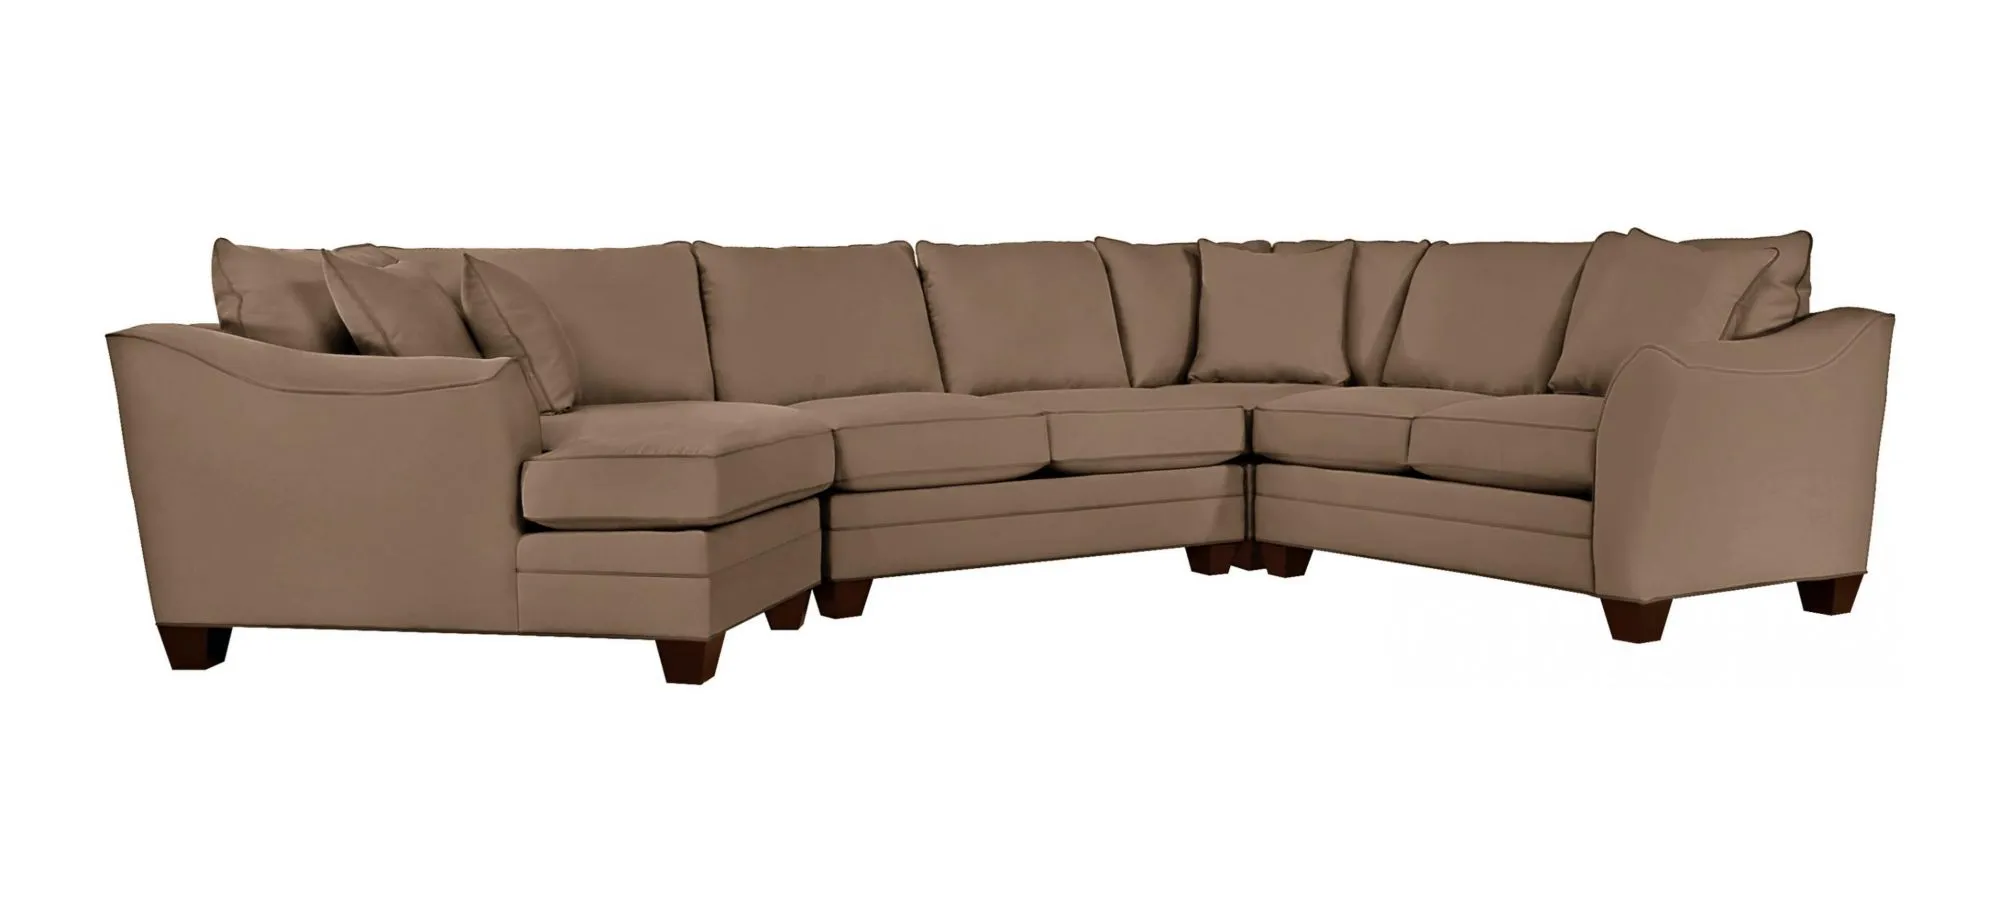 Foresthill 4-pc. Left Hand Cuddler with Loveseat Sectional Sofa in Suede So Soft Khaki by H.M. Richards